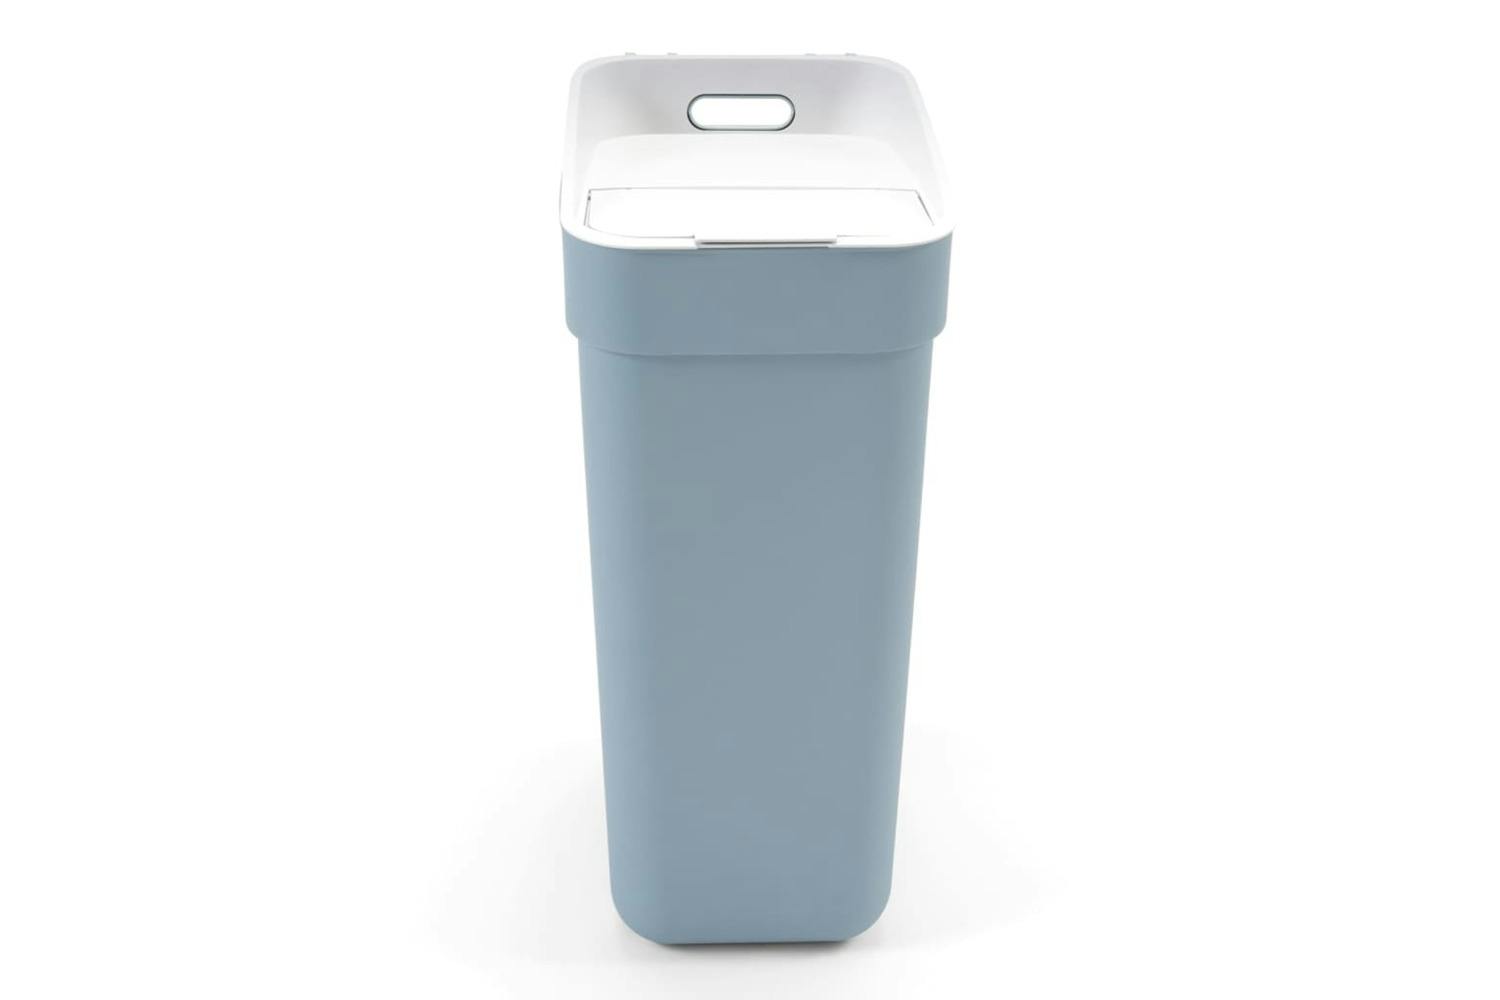 Curver 443849 Trash Can Ready To Collect 30l Light Blue